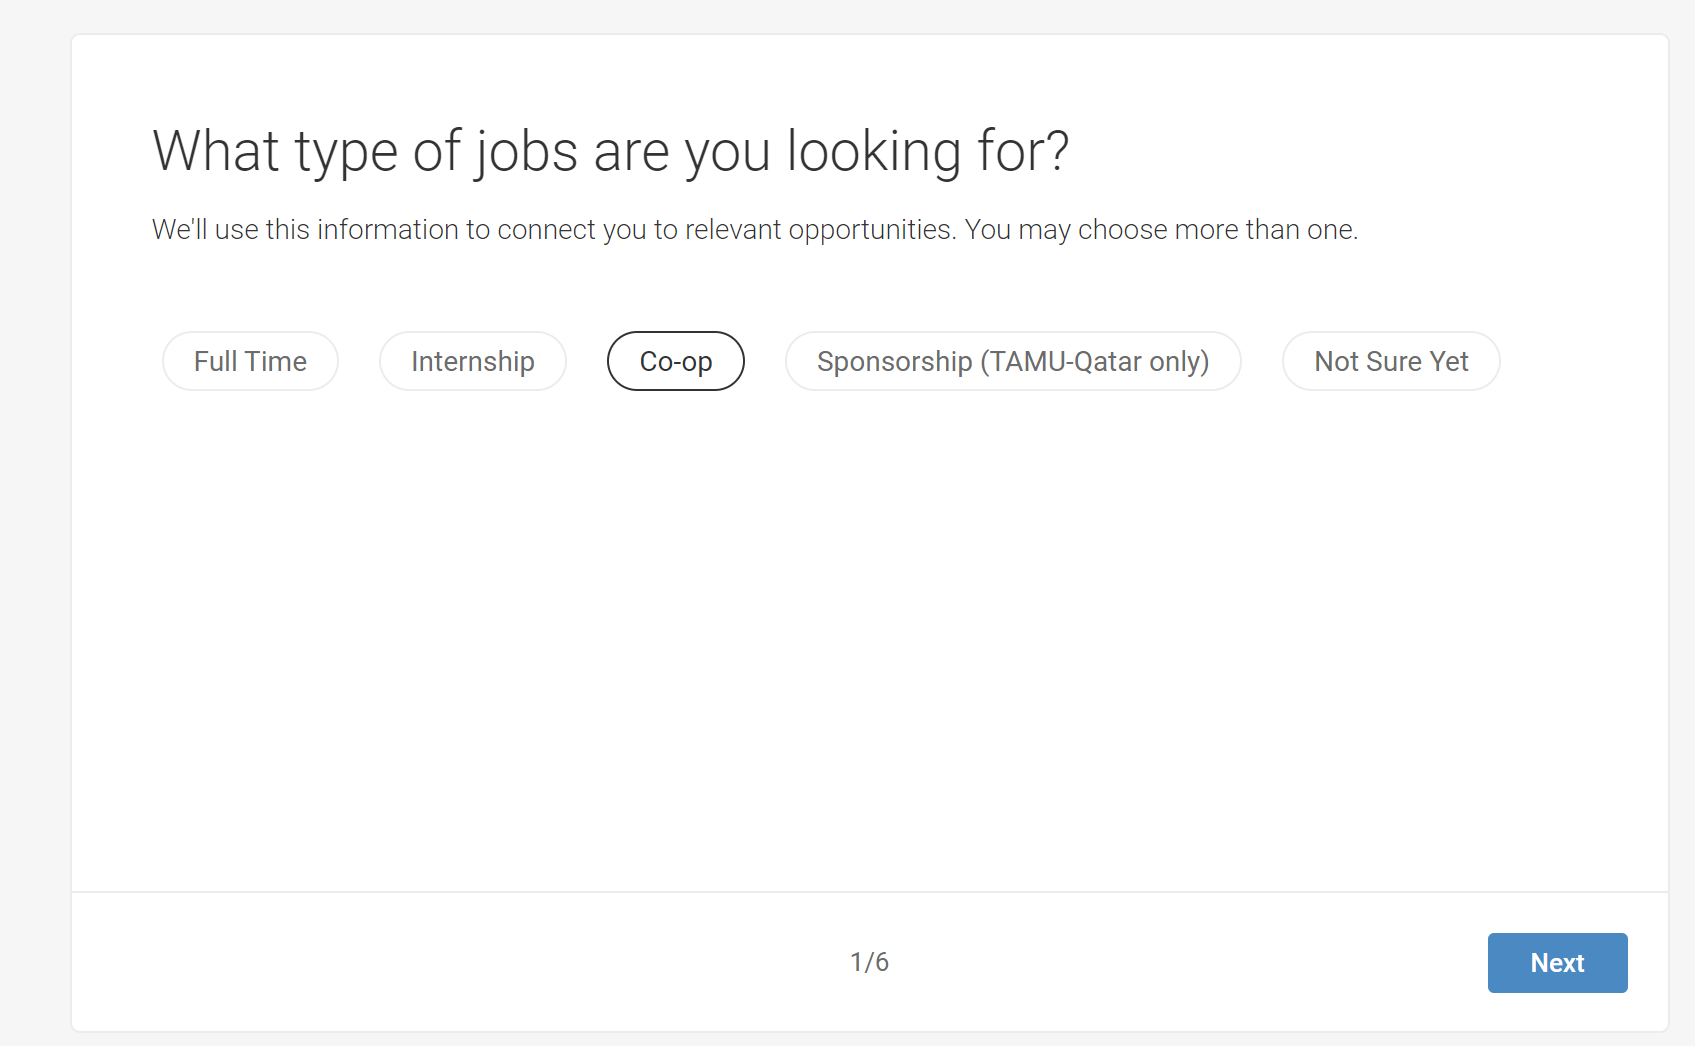 Questions students need to answer on their profile: What types of jobs are you looking for?